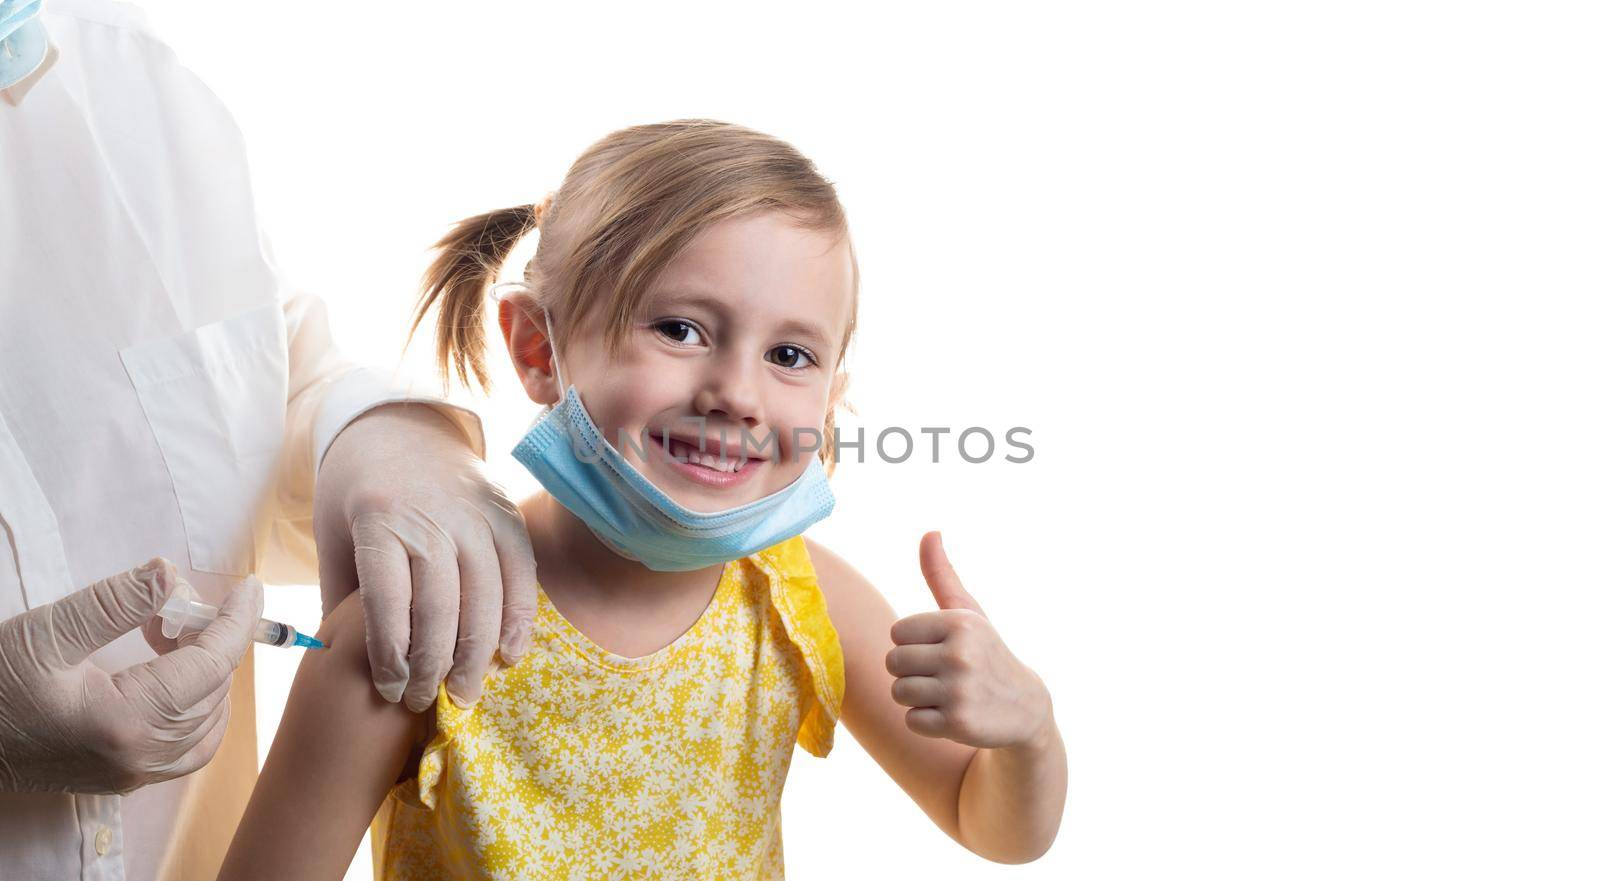 Doctor is vaccinating a young Caucasian girl in yellow dress showing thumb up isolated on white background